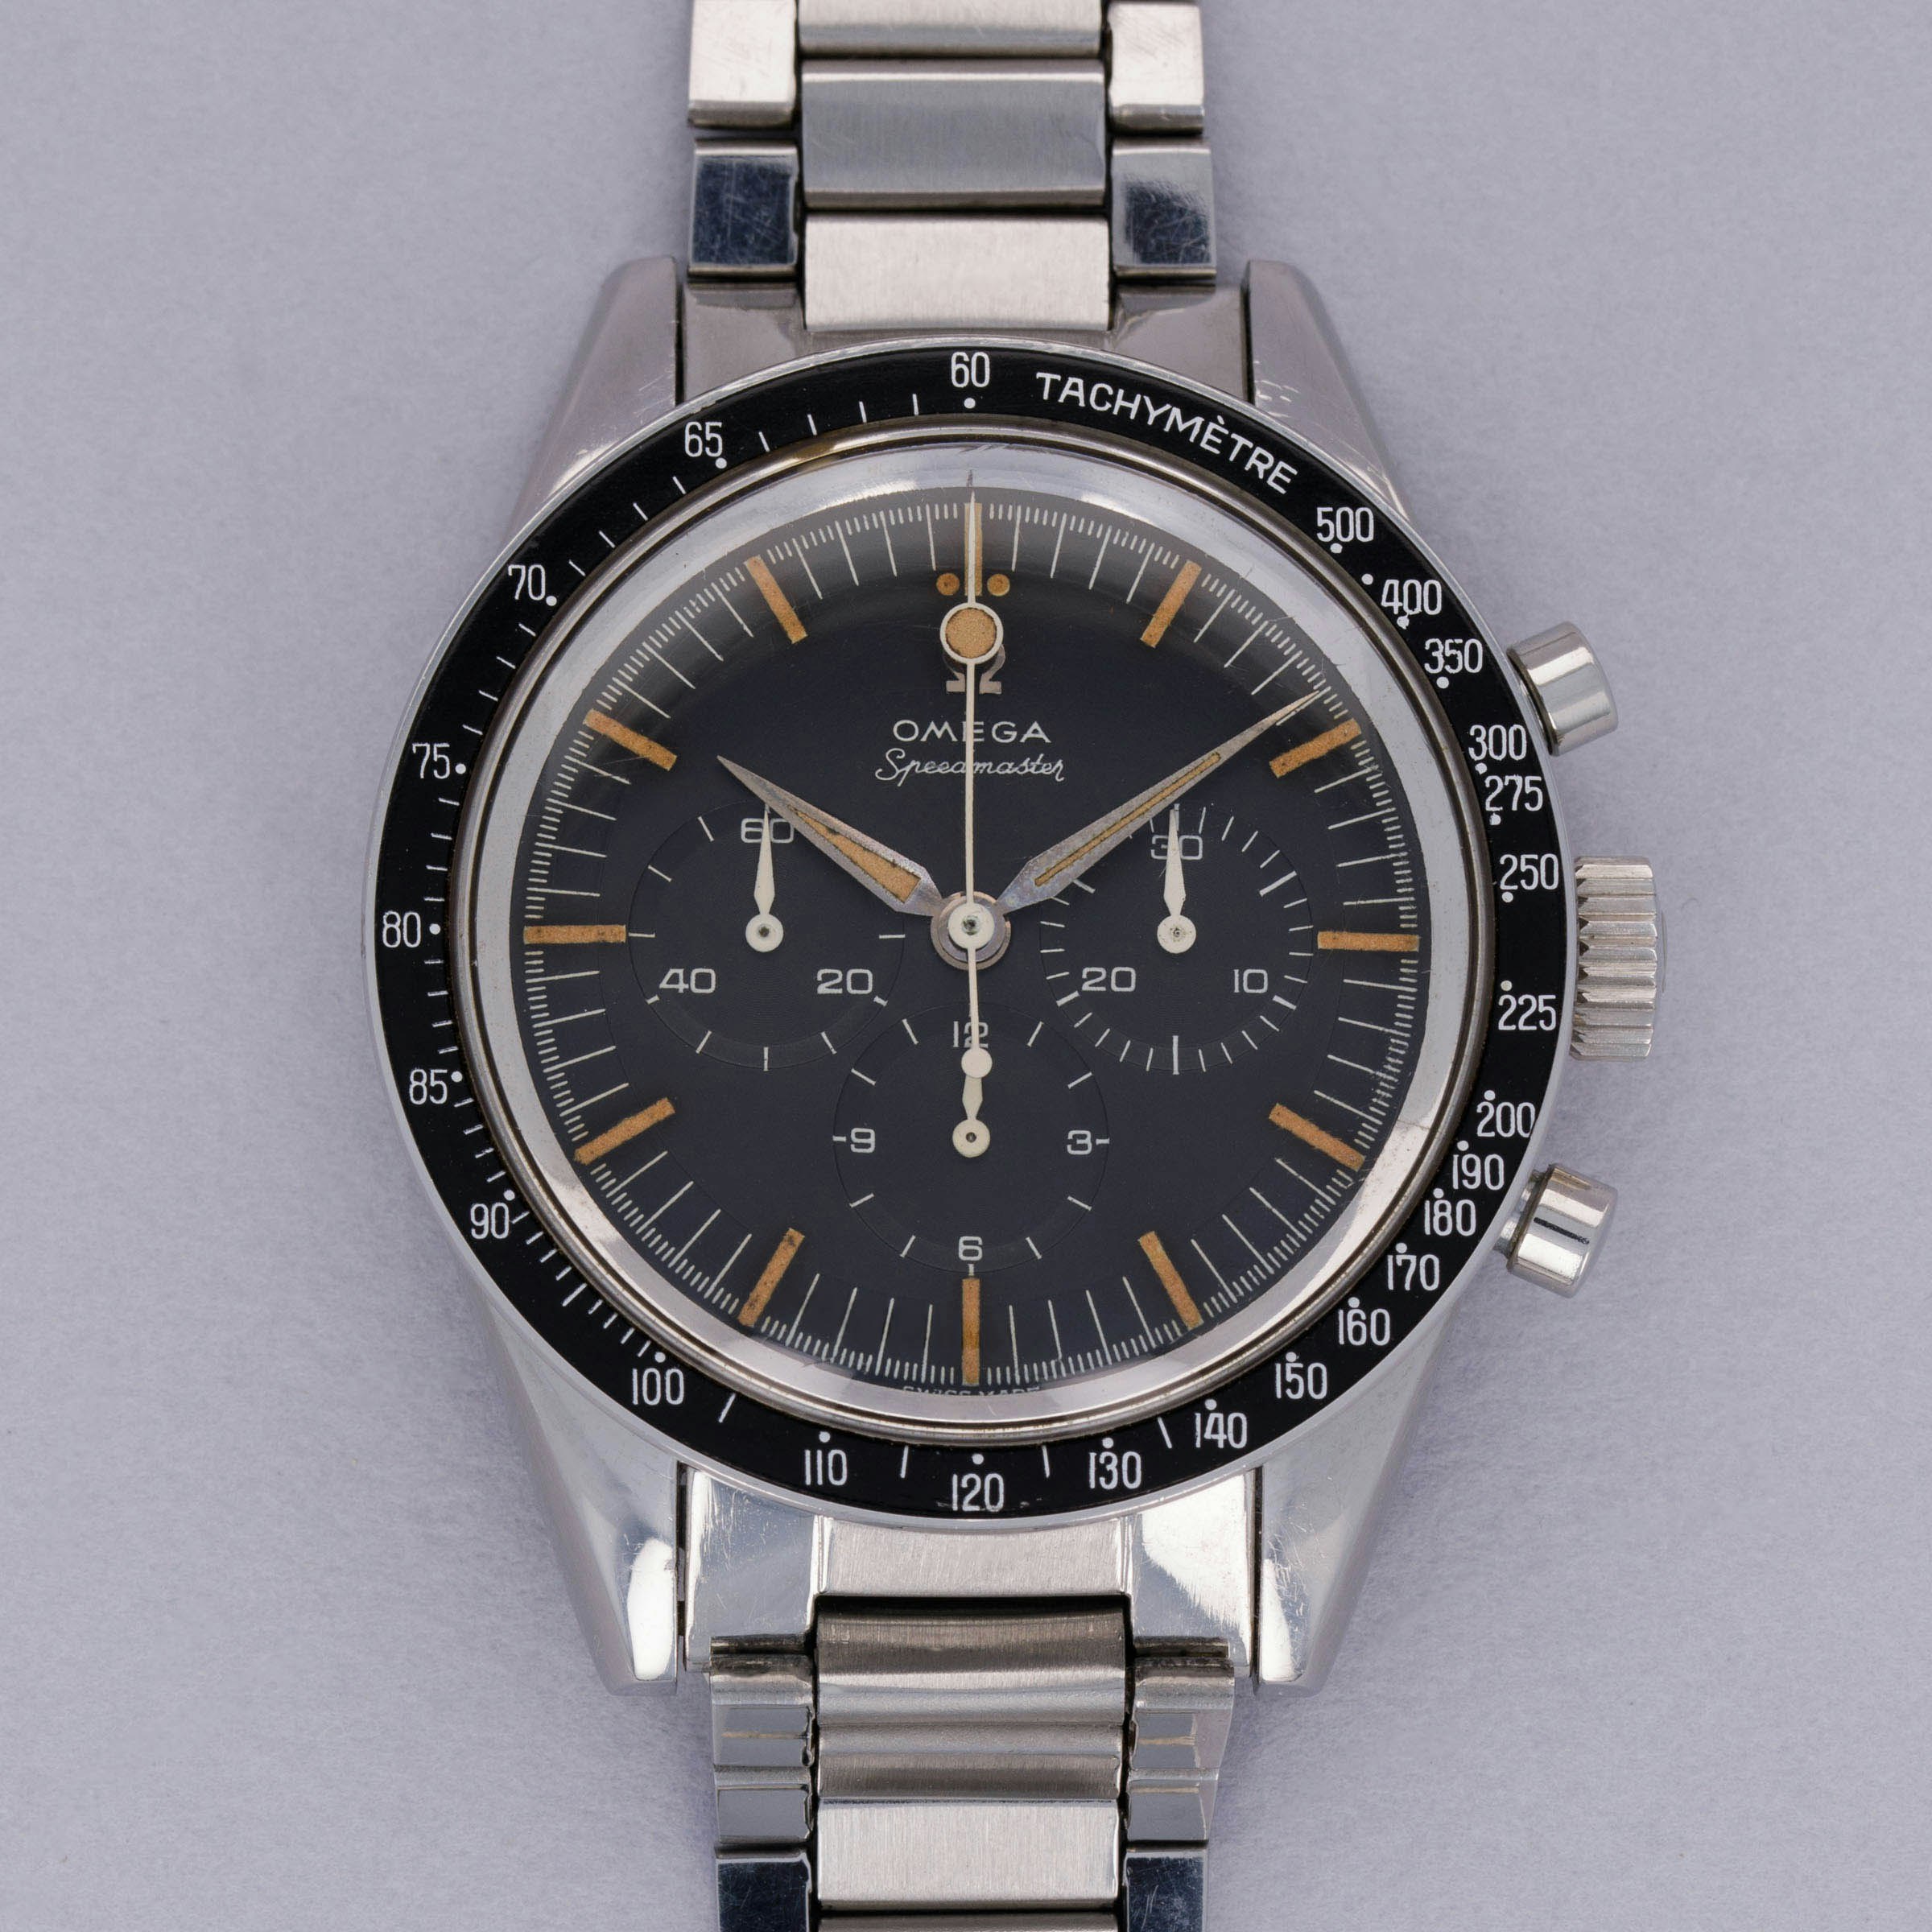 Thumbnail for Omega Speedmaster CK 2998-3 Fuerza Aerea Del Peru "FAP" Box and Papers Time Capsule